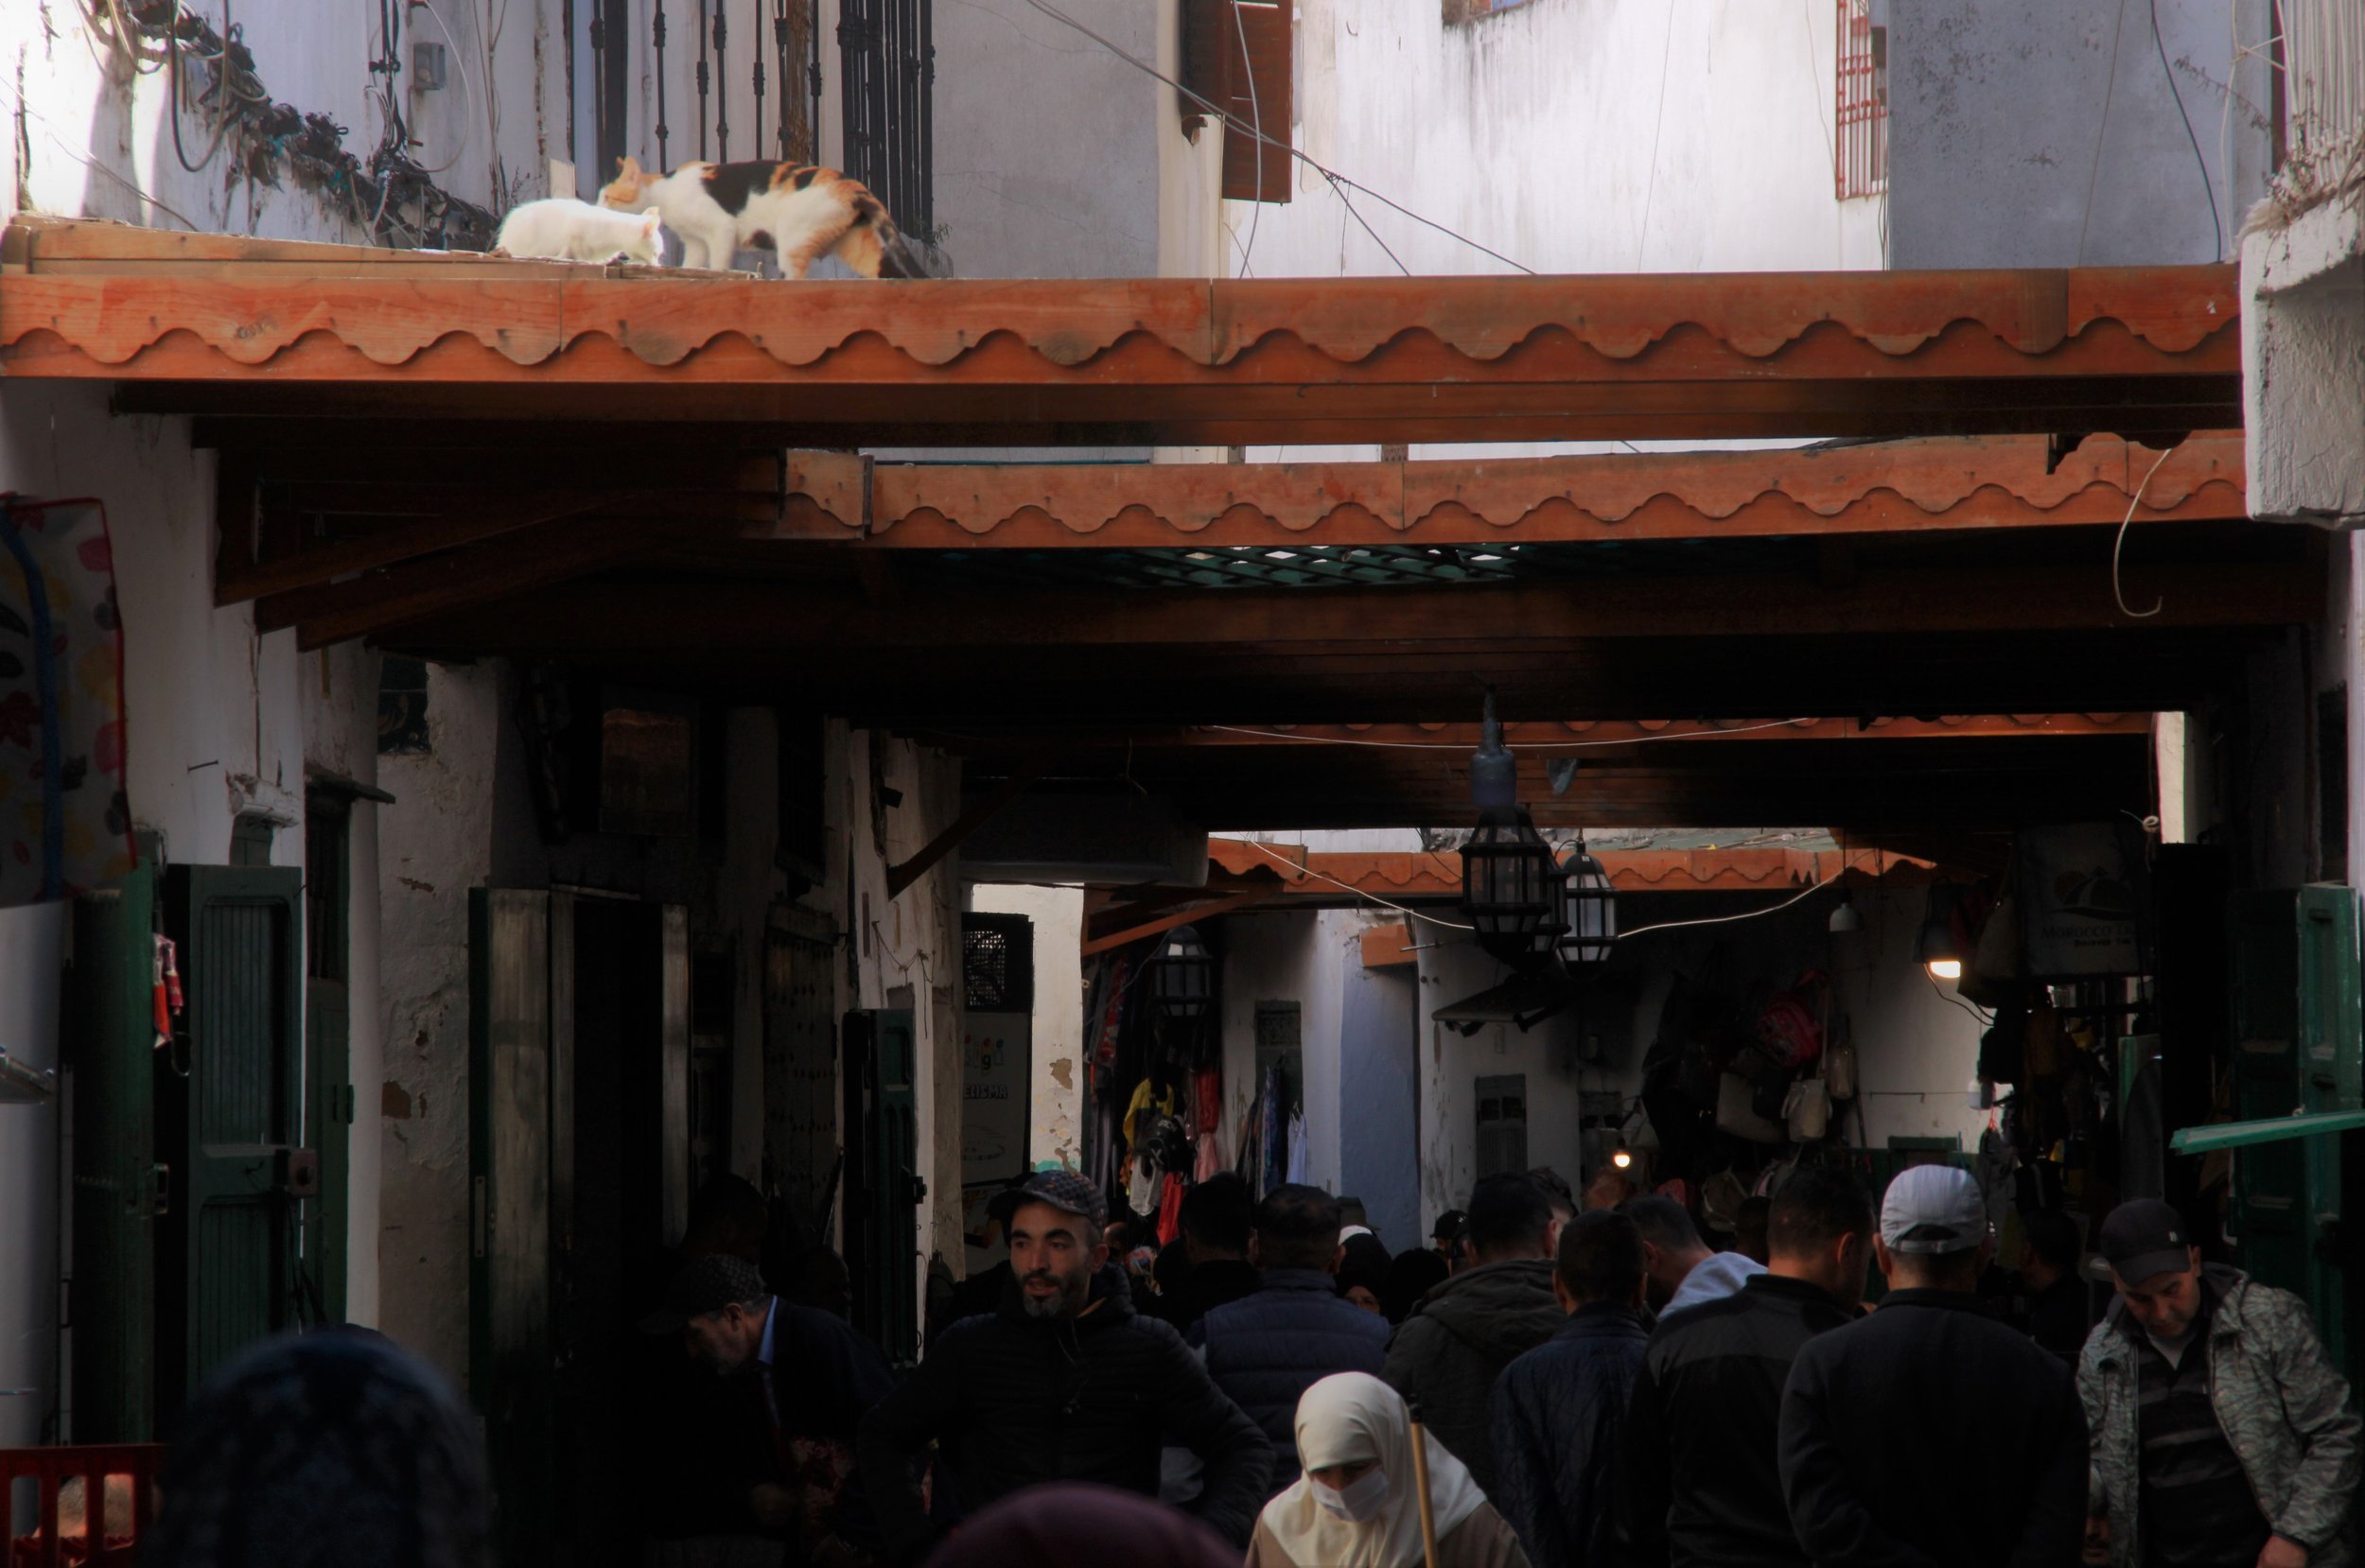  PICTURED: A busy mid-day souk in the old medina in Tétouan, where business is done both above and below the level of one’s eyes. PC: Andrew Corbley © 